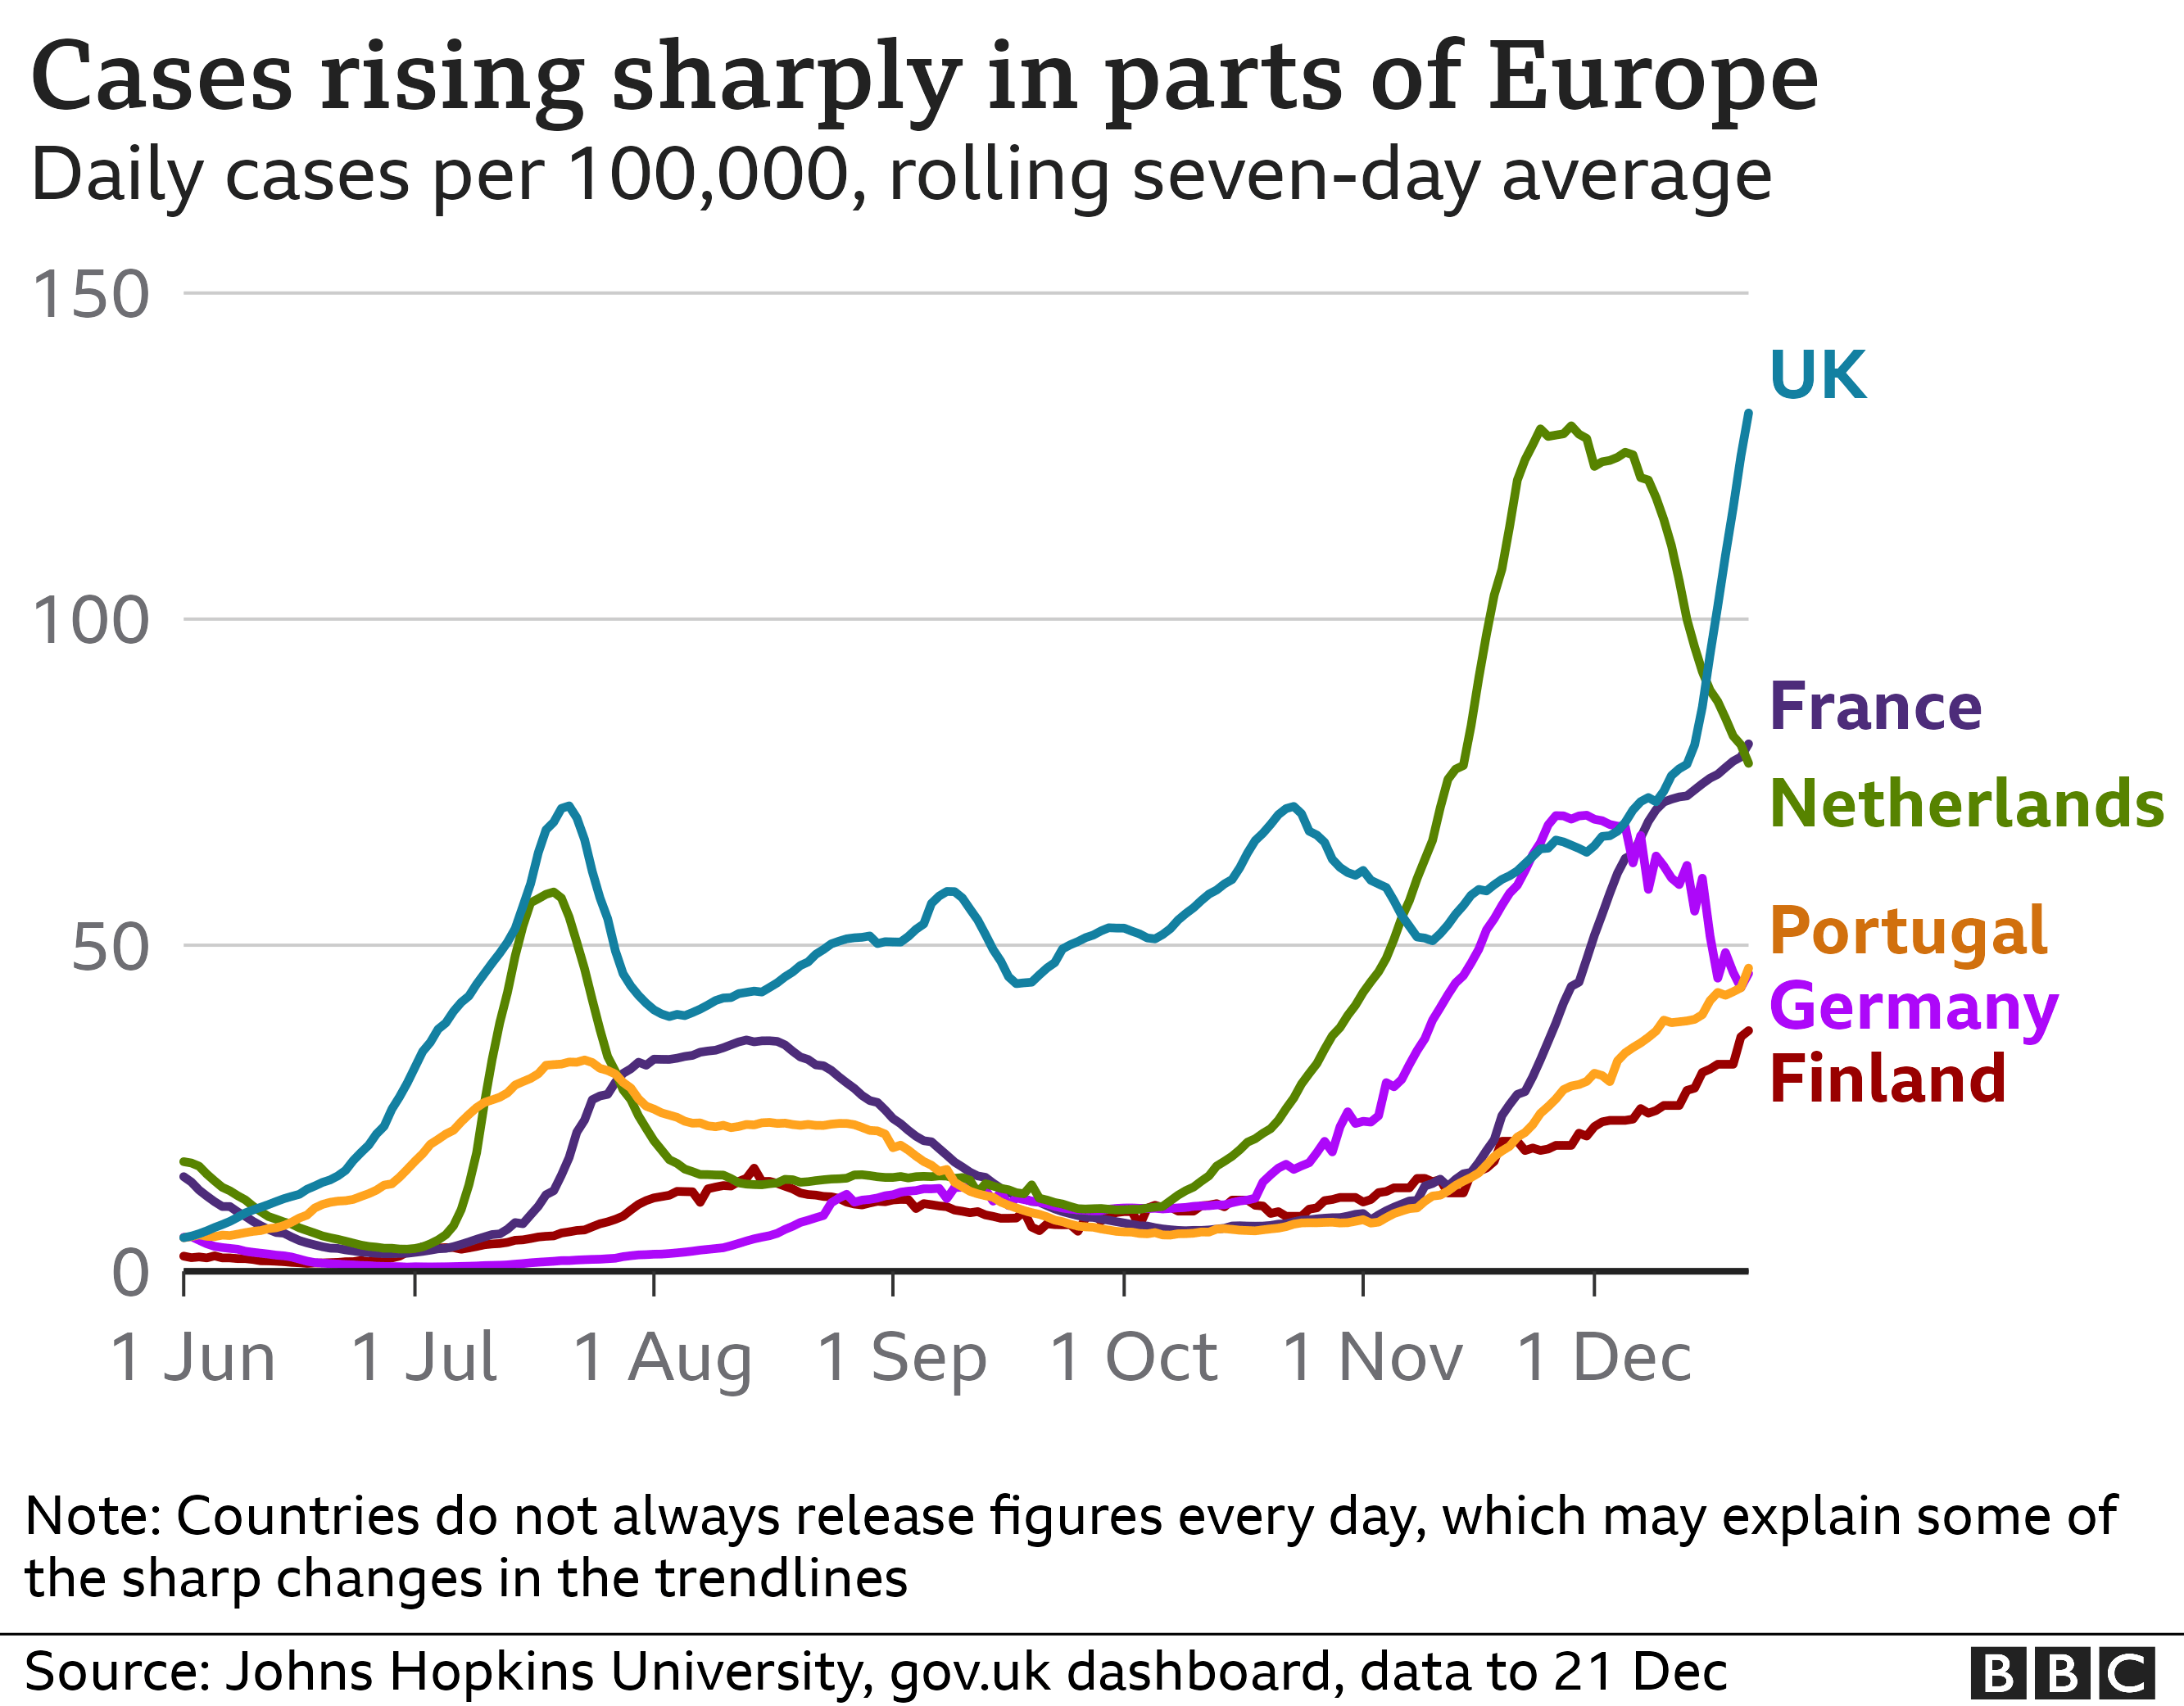 Chart shows cases rising across Europe